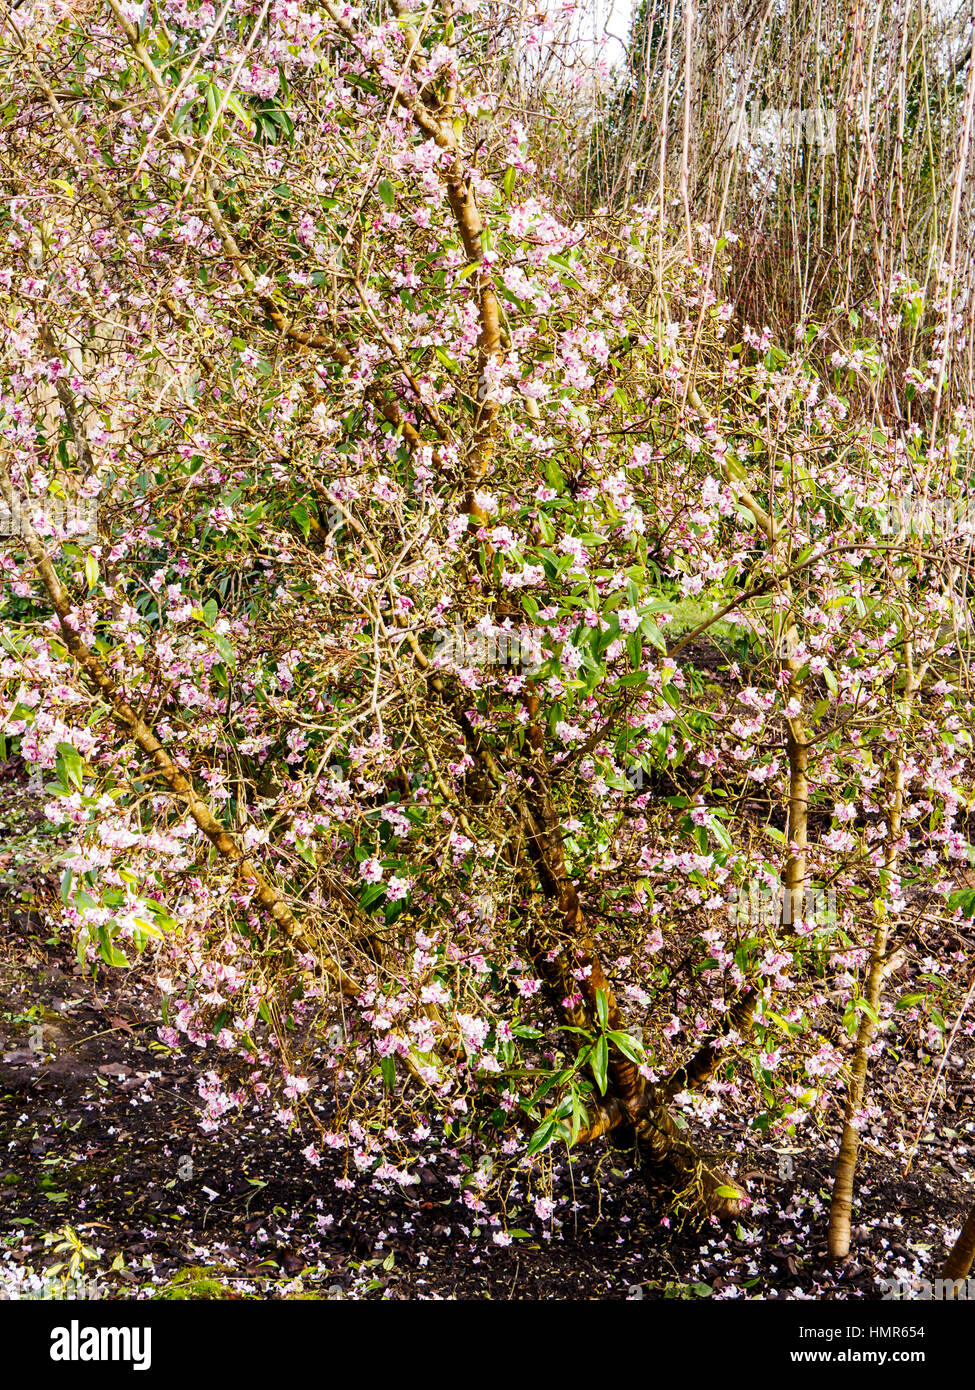 The flowers of Daphne Bholua 'Jacqueline Postill' bring a little spring cheer to a woodland shrubbery in a winter garde in Hampshire. Stock Photo